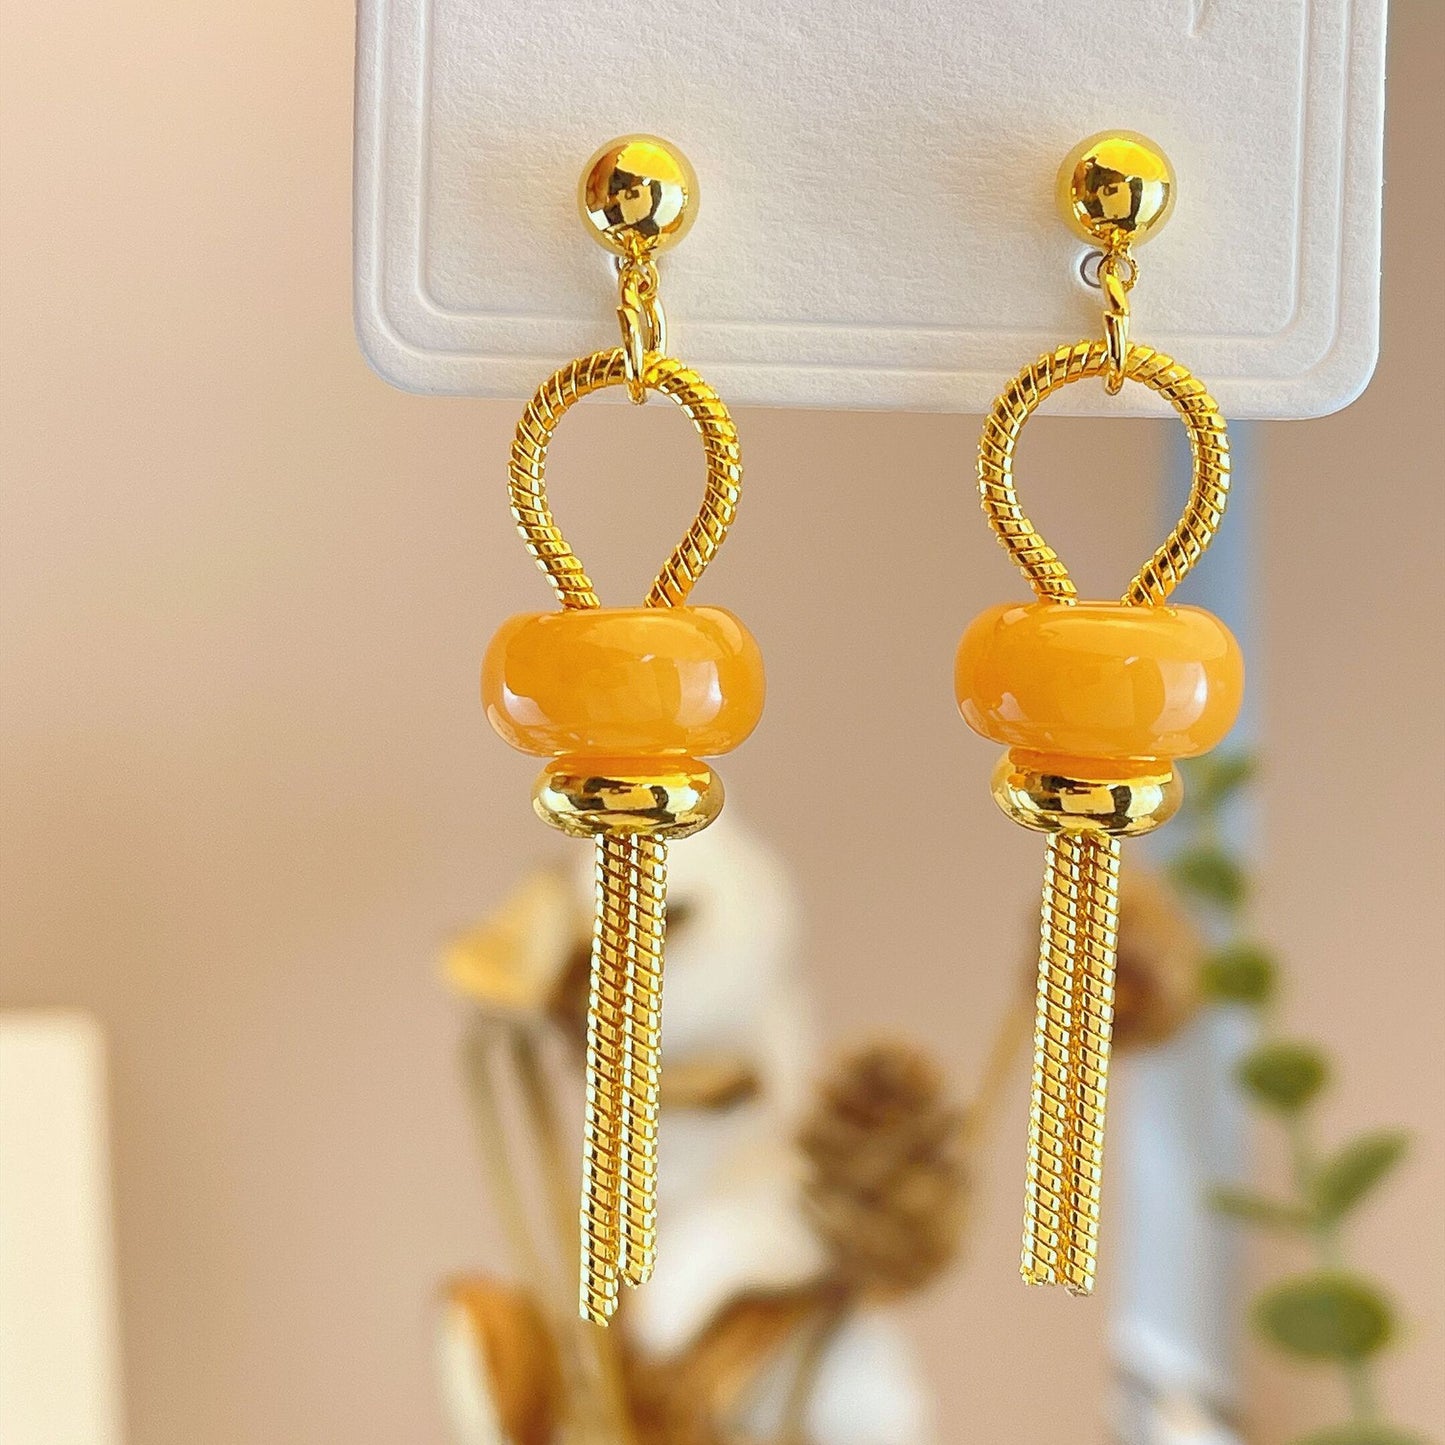 Women's Antique Chinese Style Small Bell Pepper Earrings